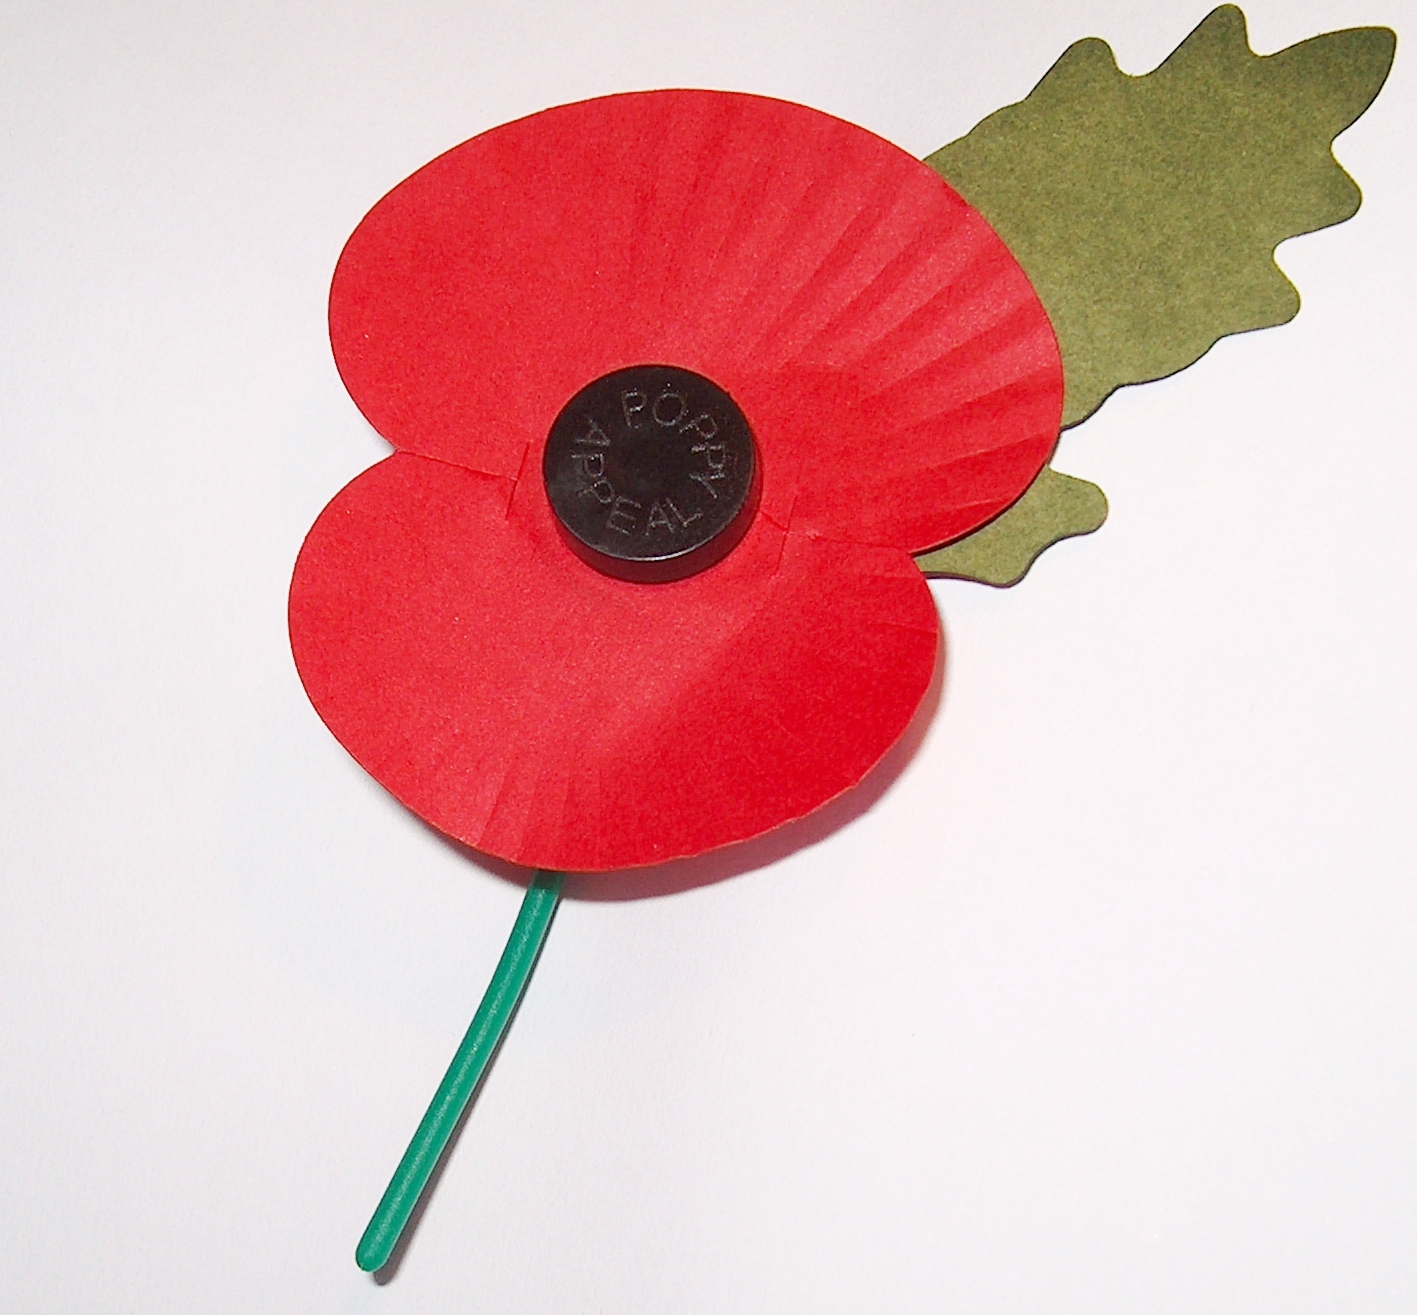 Poppy Flowers for Remember Someone